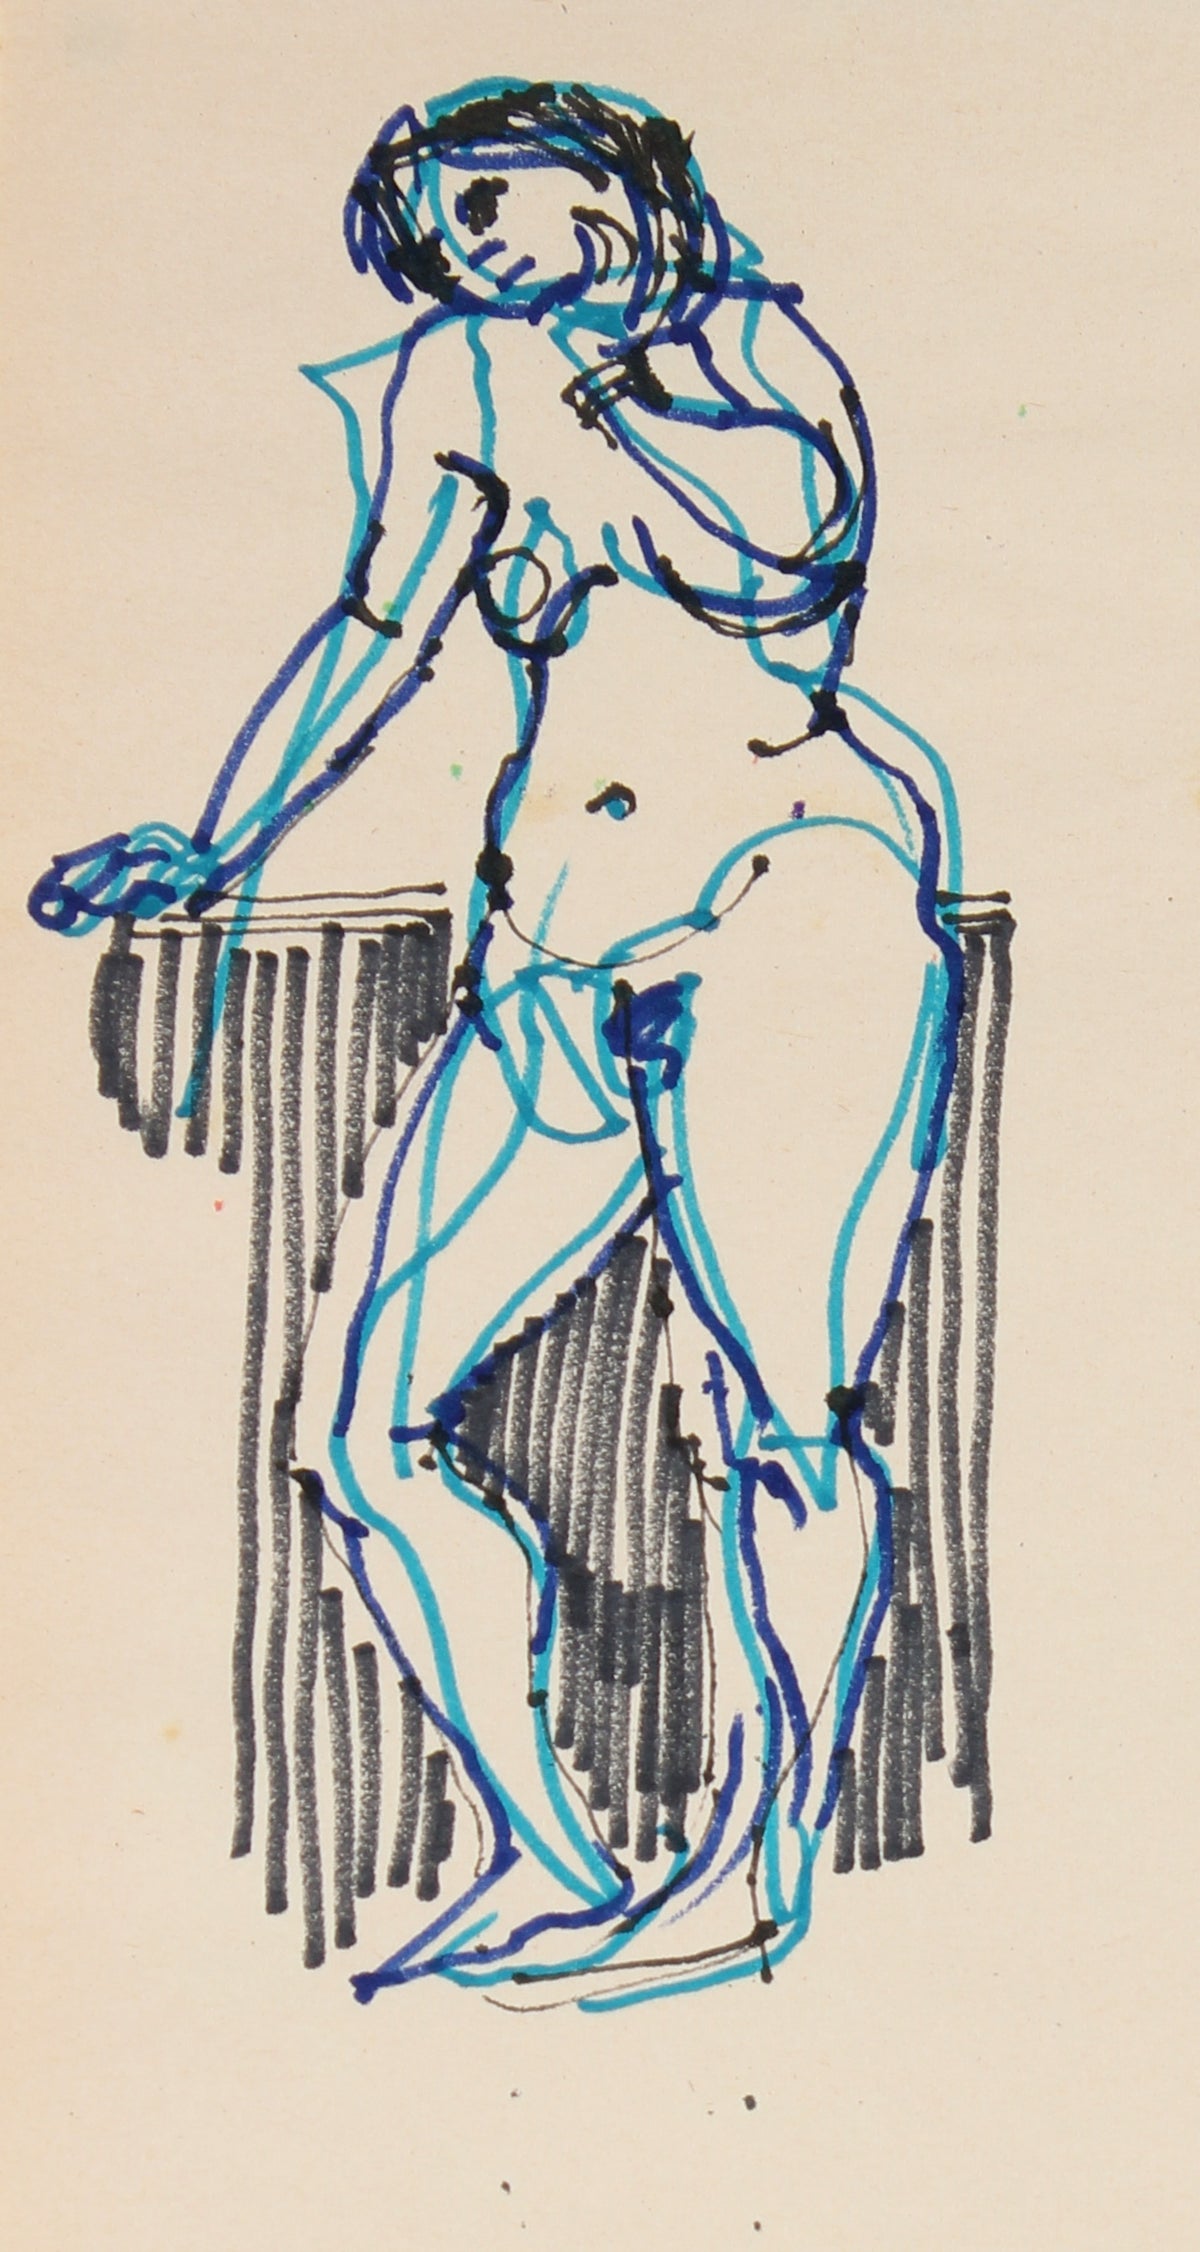 Monochromatic Female Nude With Blue Highlights &lt;br&gt;1965 Ink &lt;br&gt;&lt;br&gt;#29751